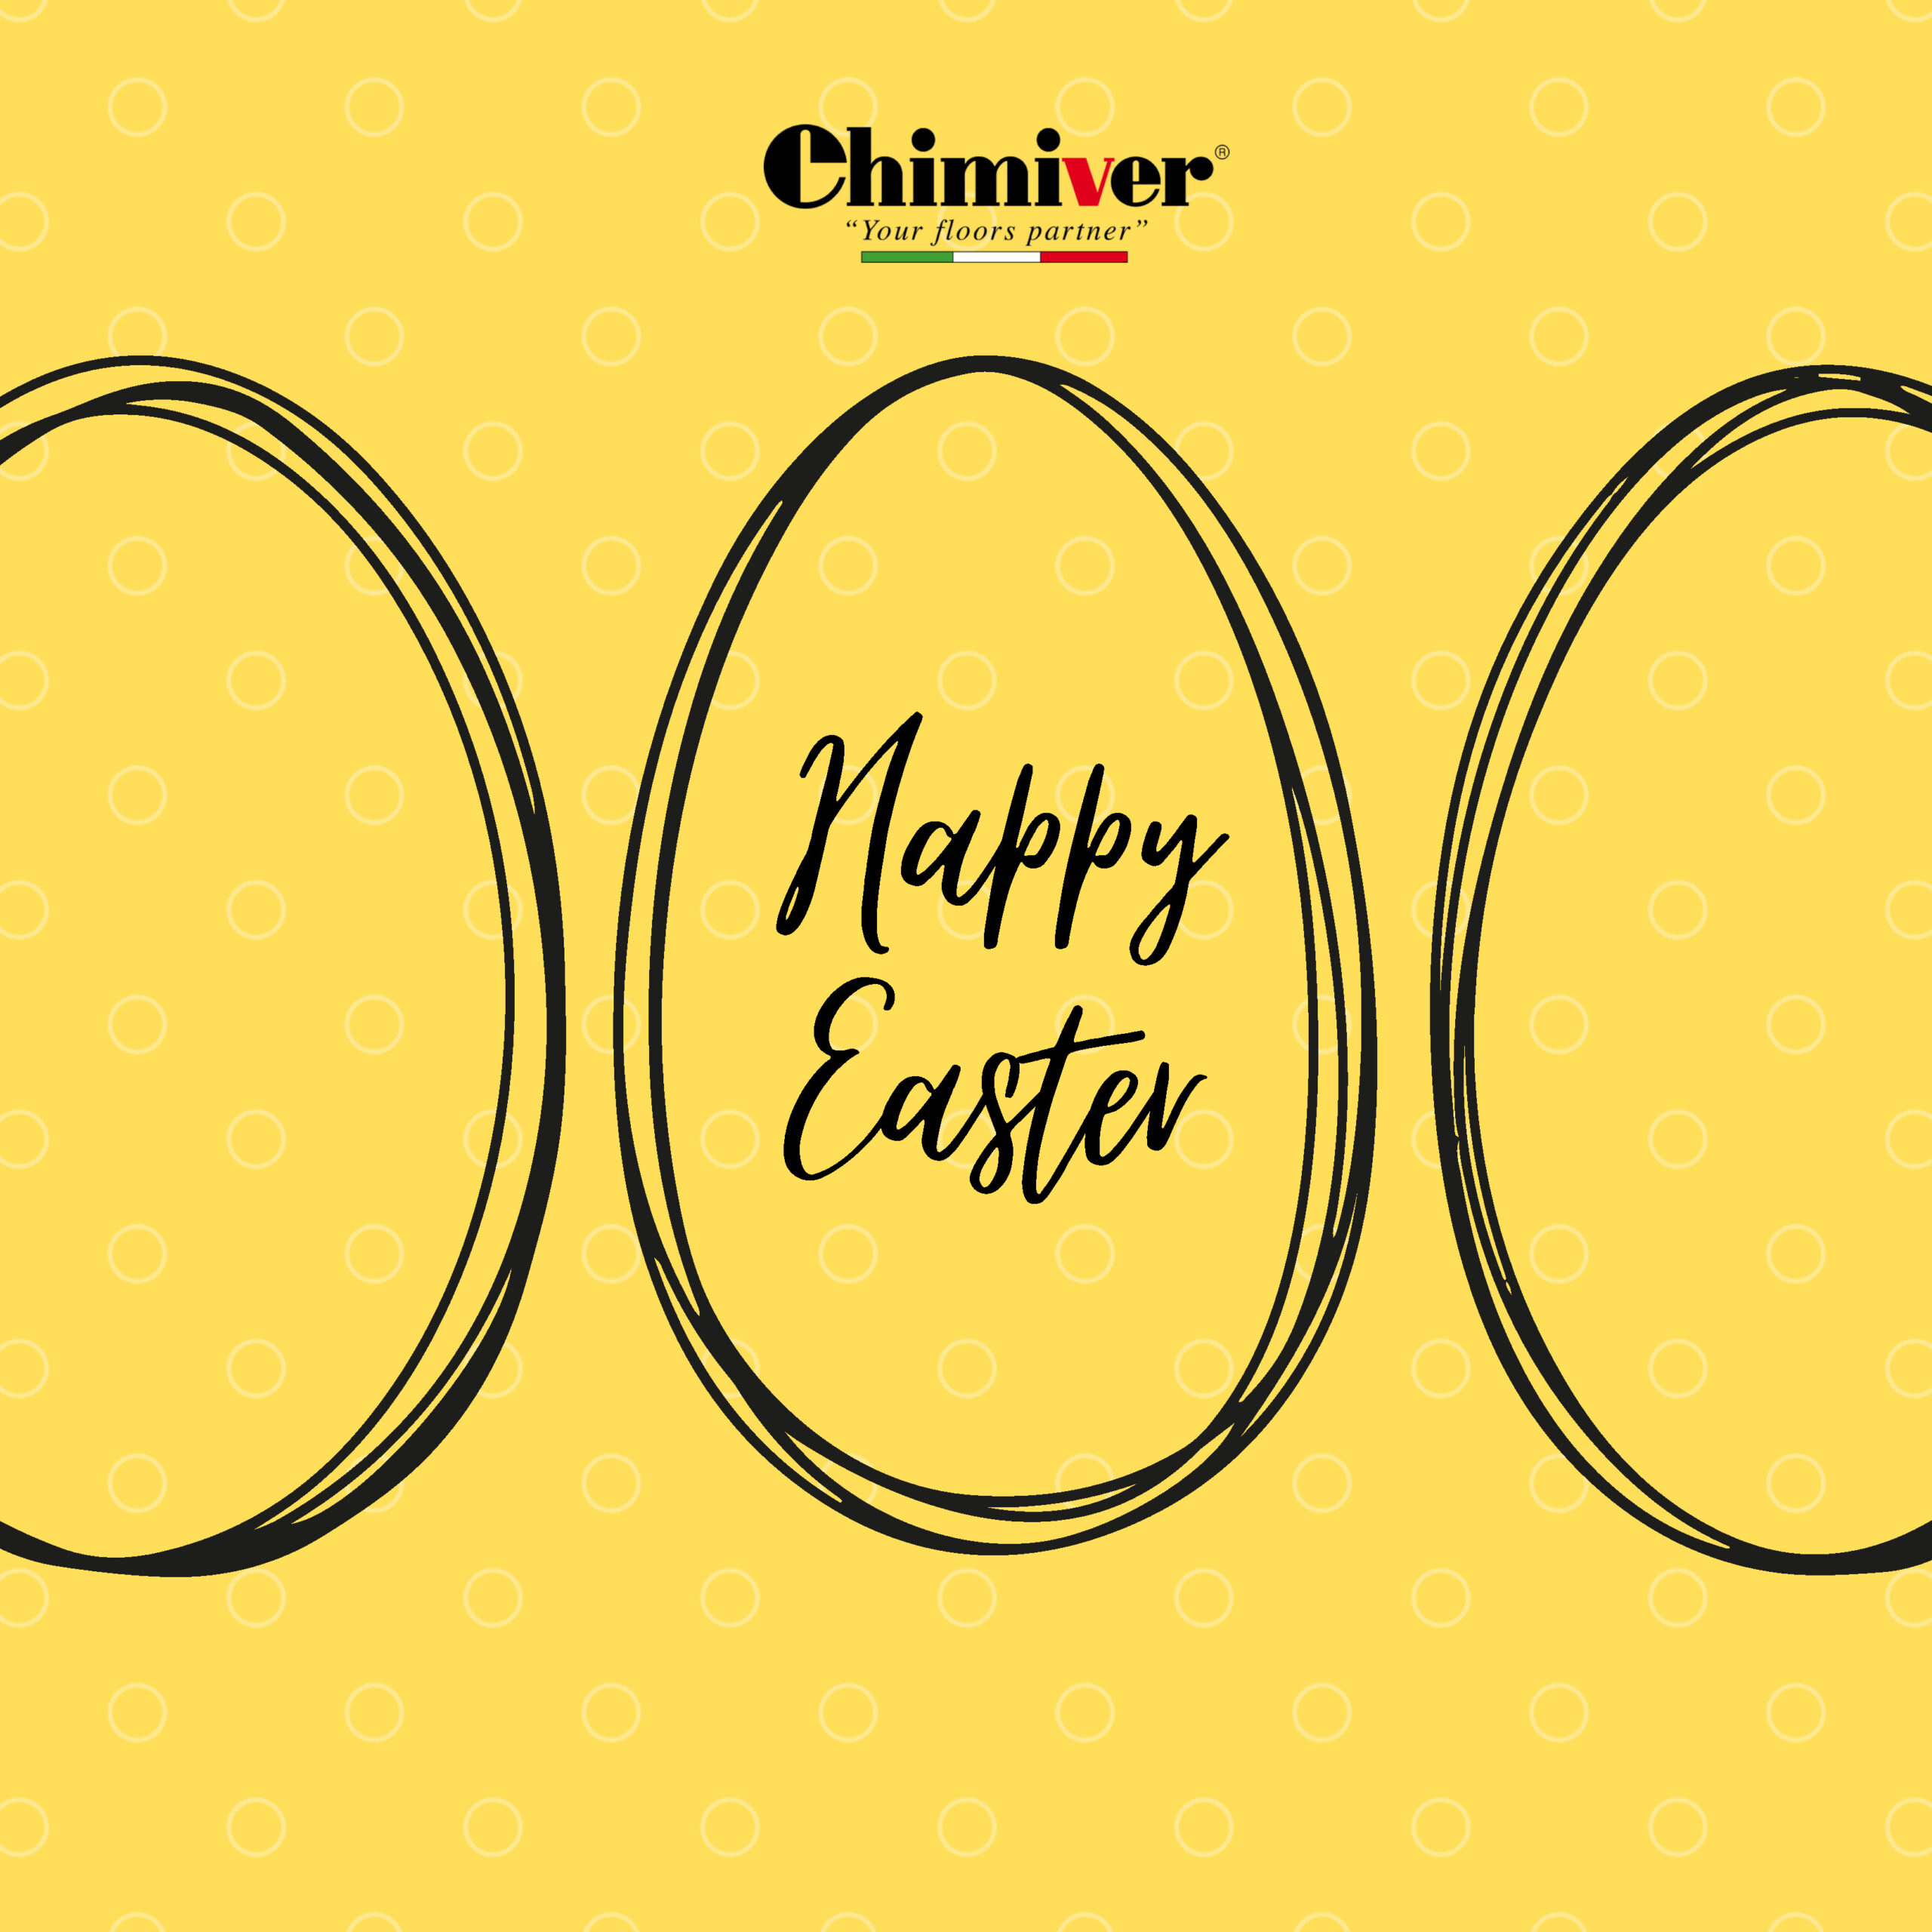 Happy Easter from Chimiver!